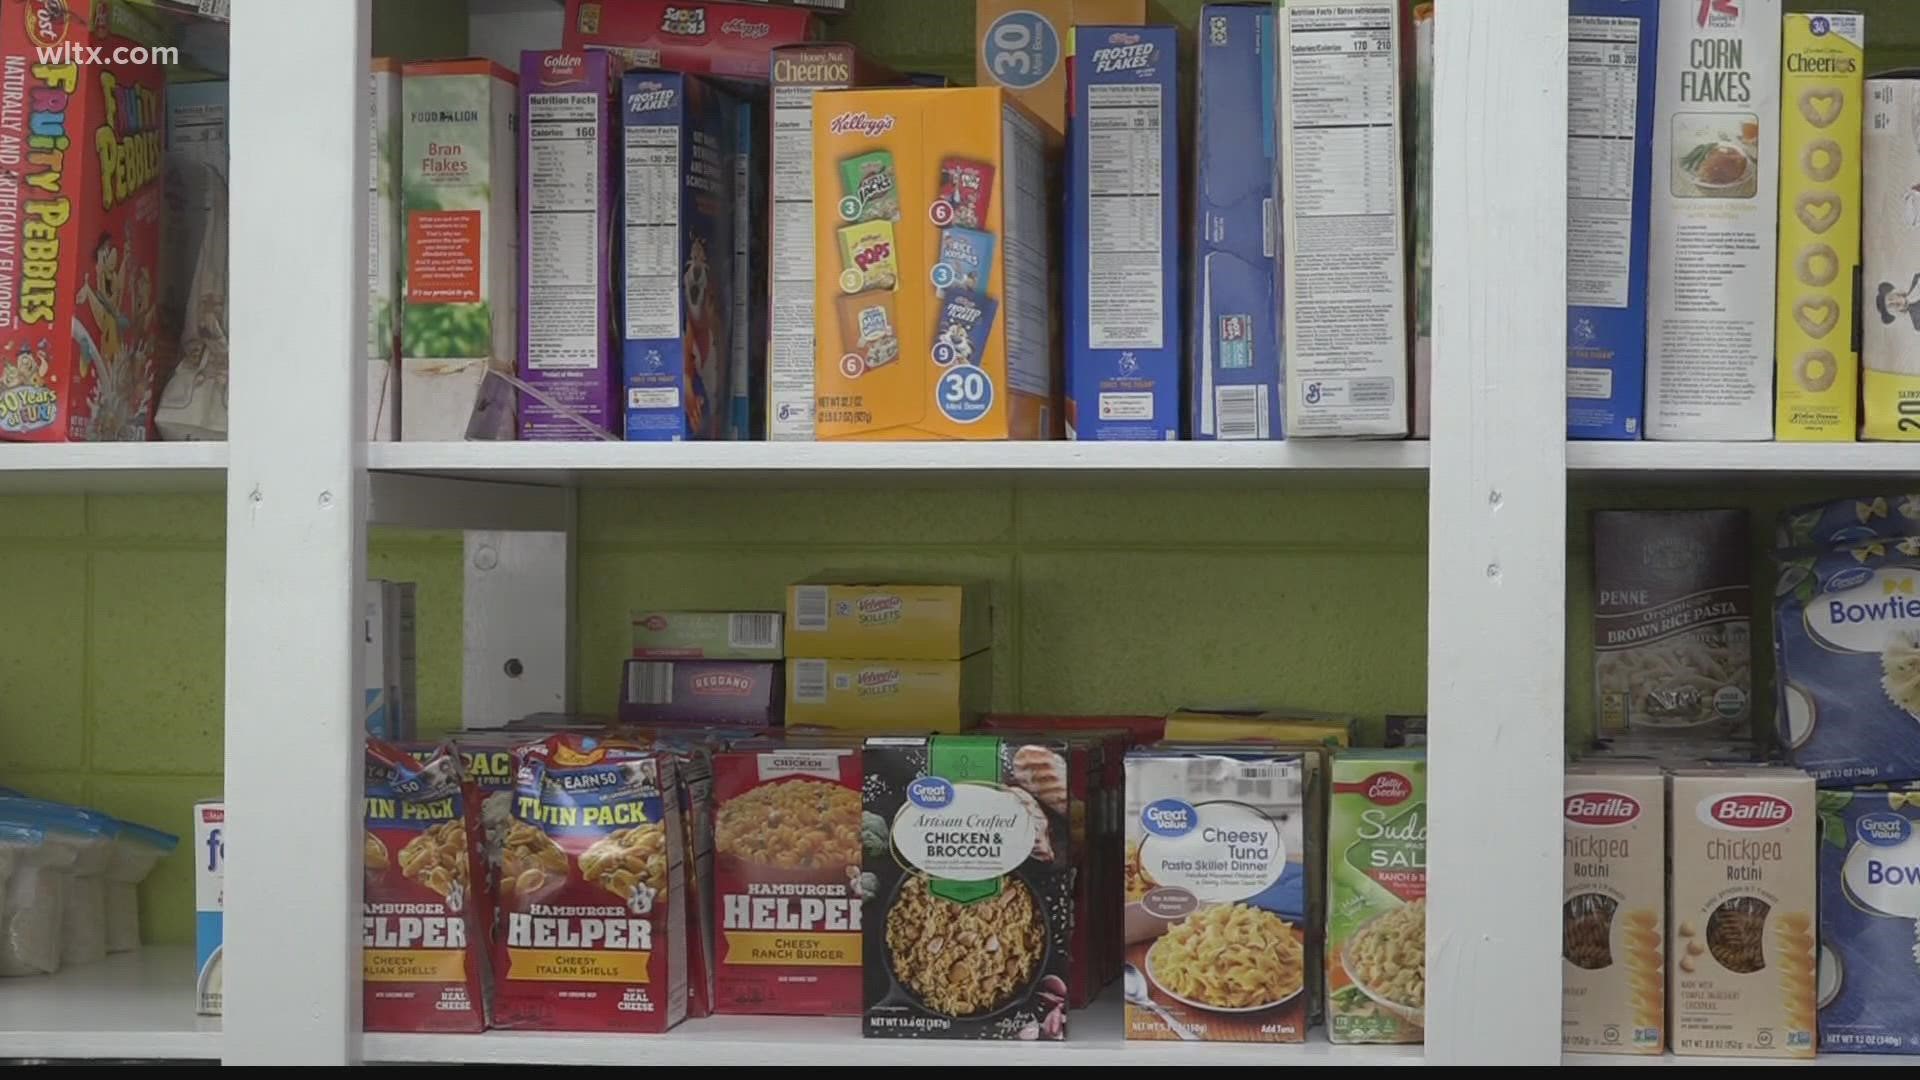 Local church volunteers are helping to feed people one box at a time.